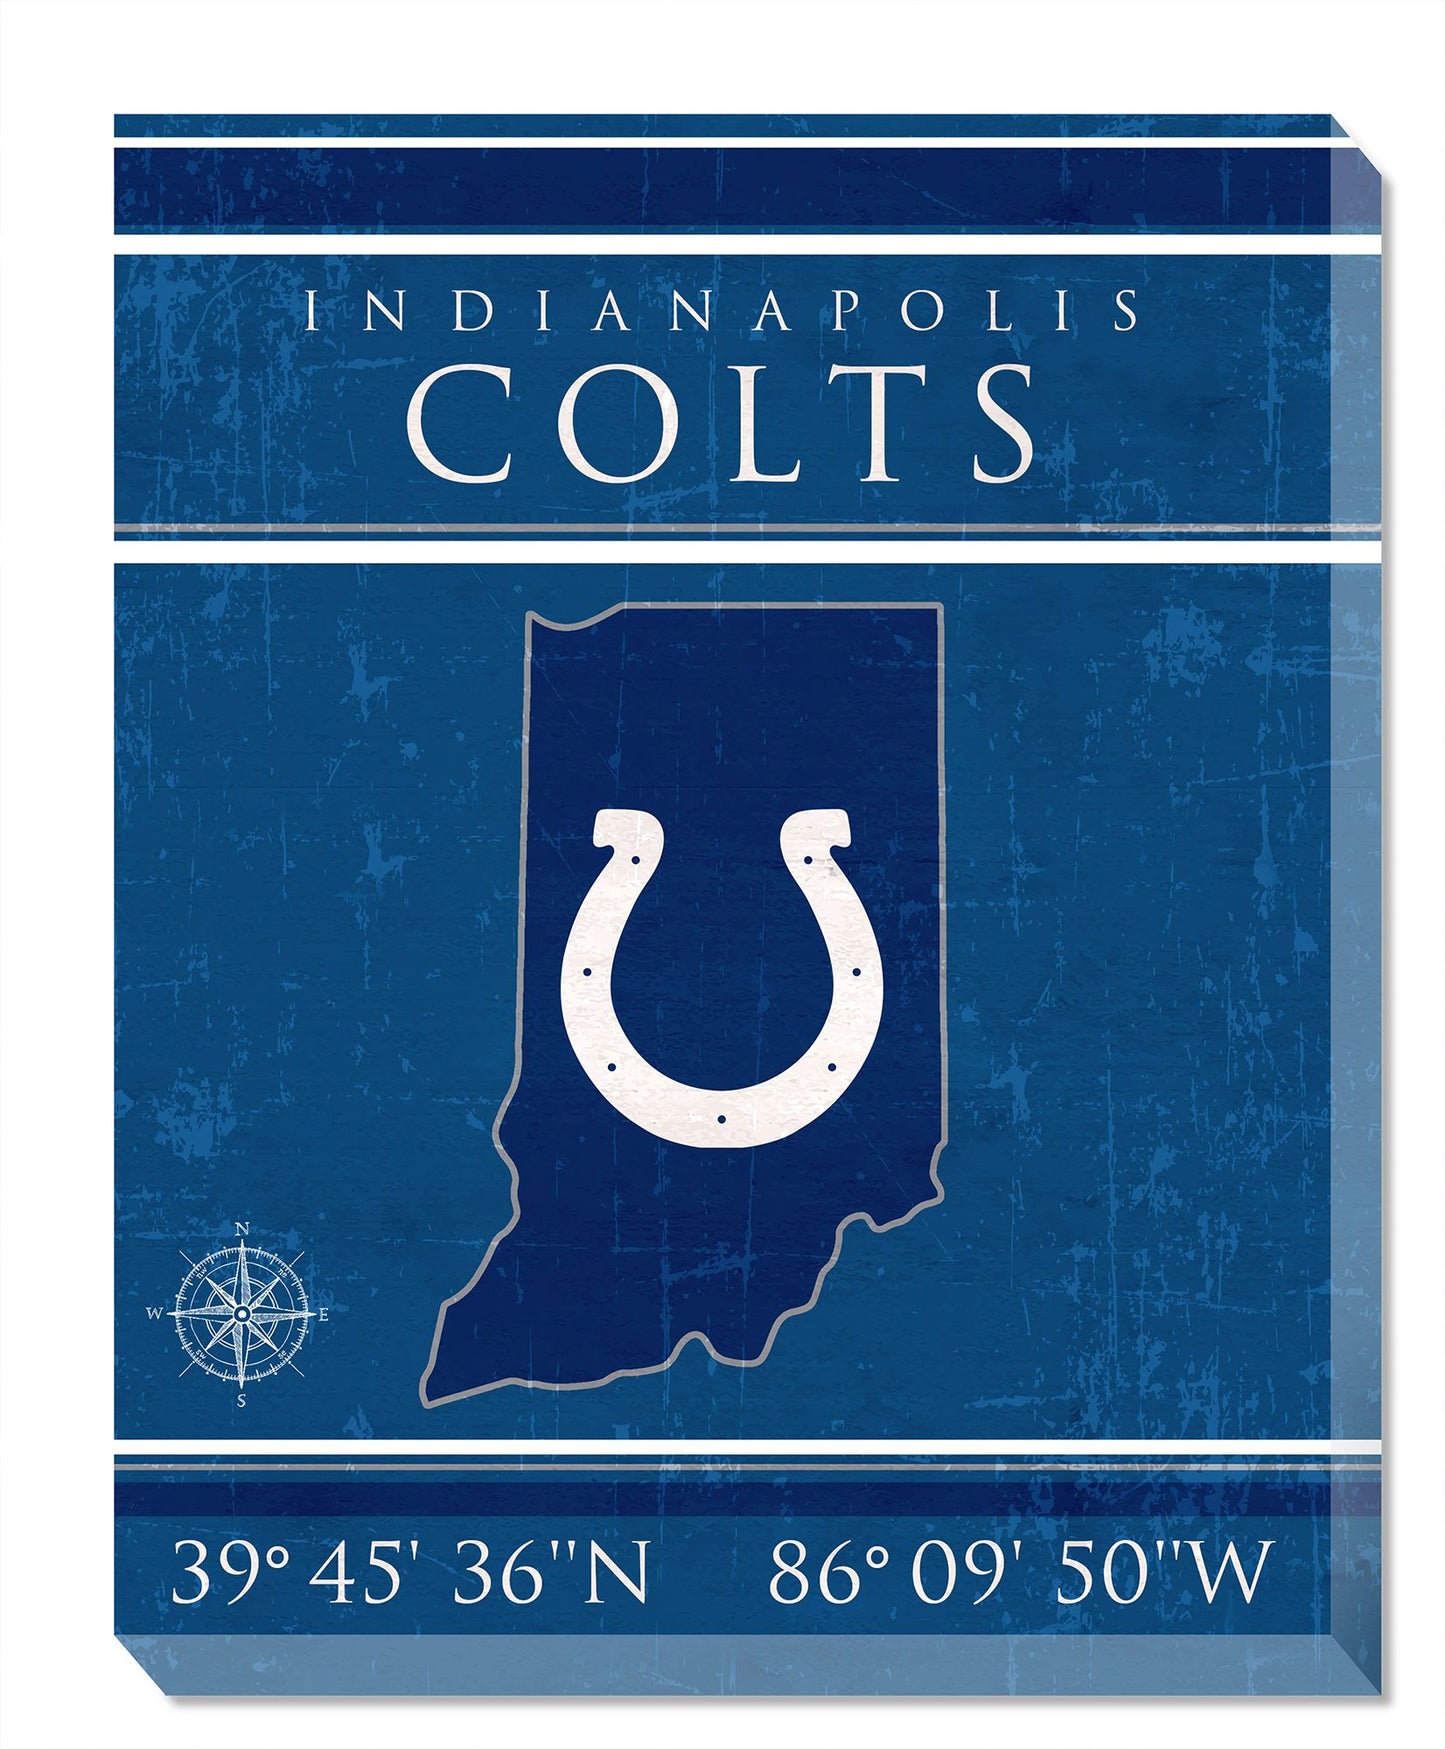 Indianapolis Colts 16" x 20" Canvas Sign by Fan Creations